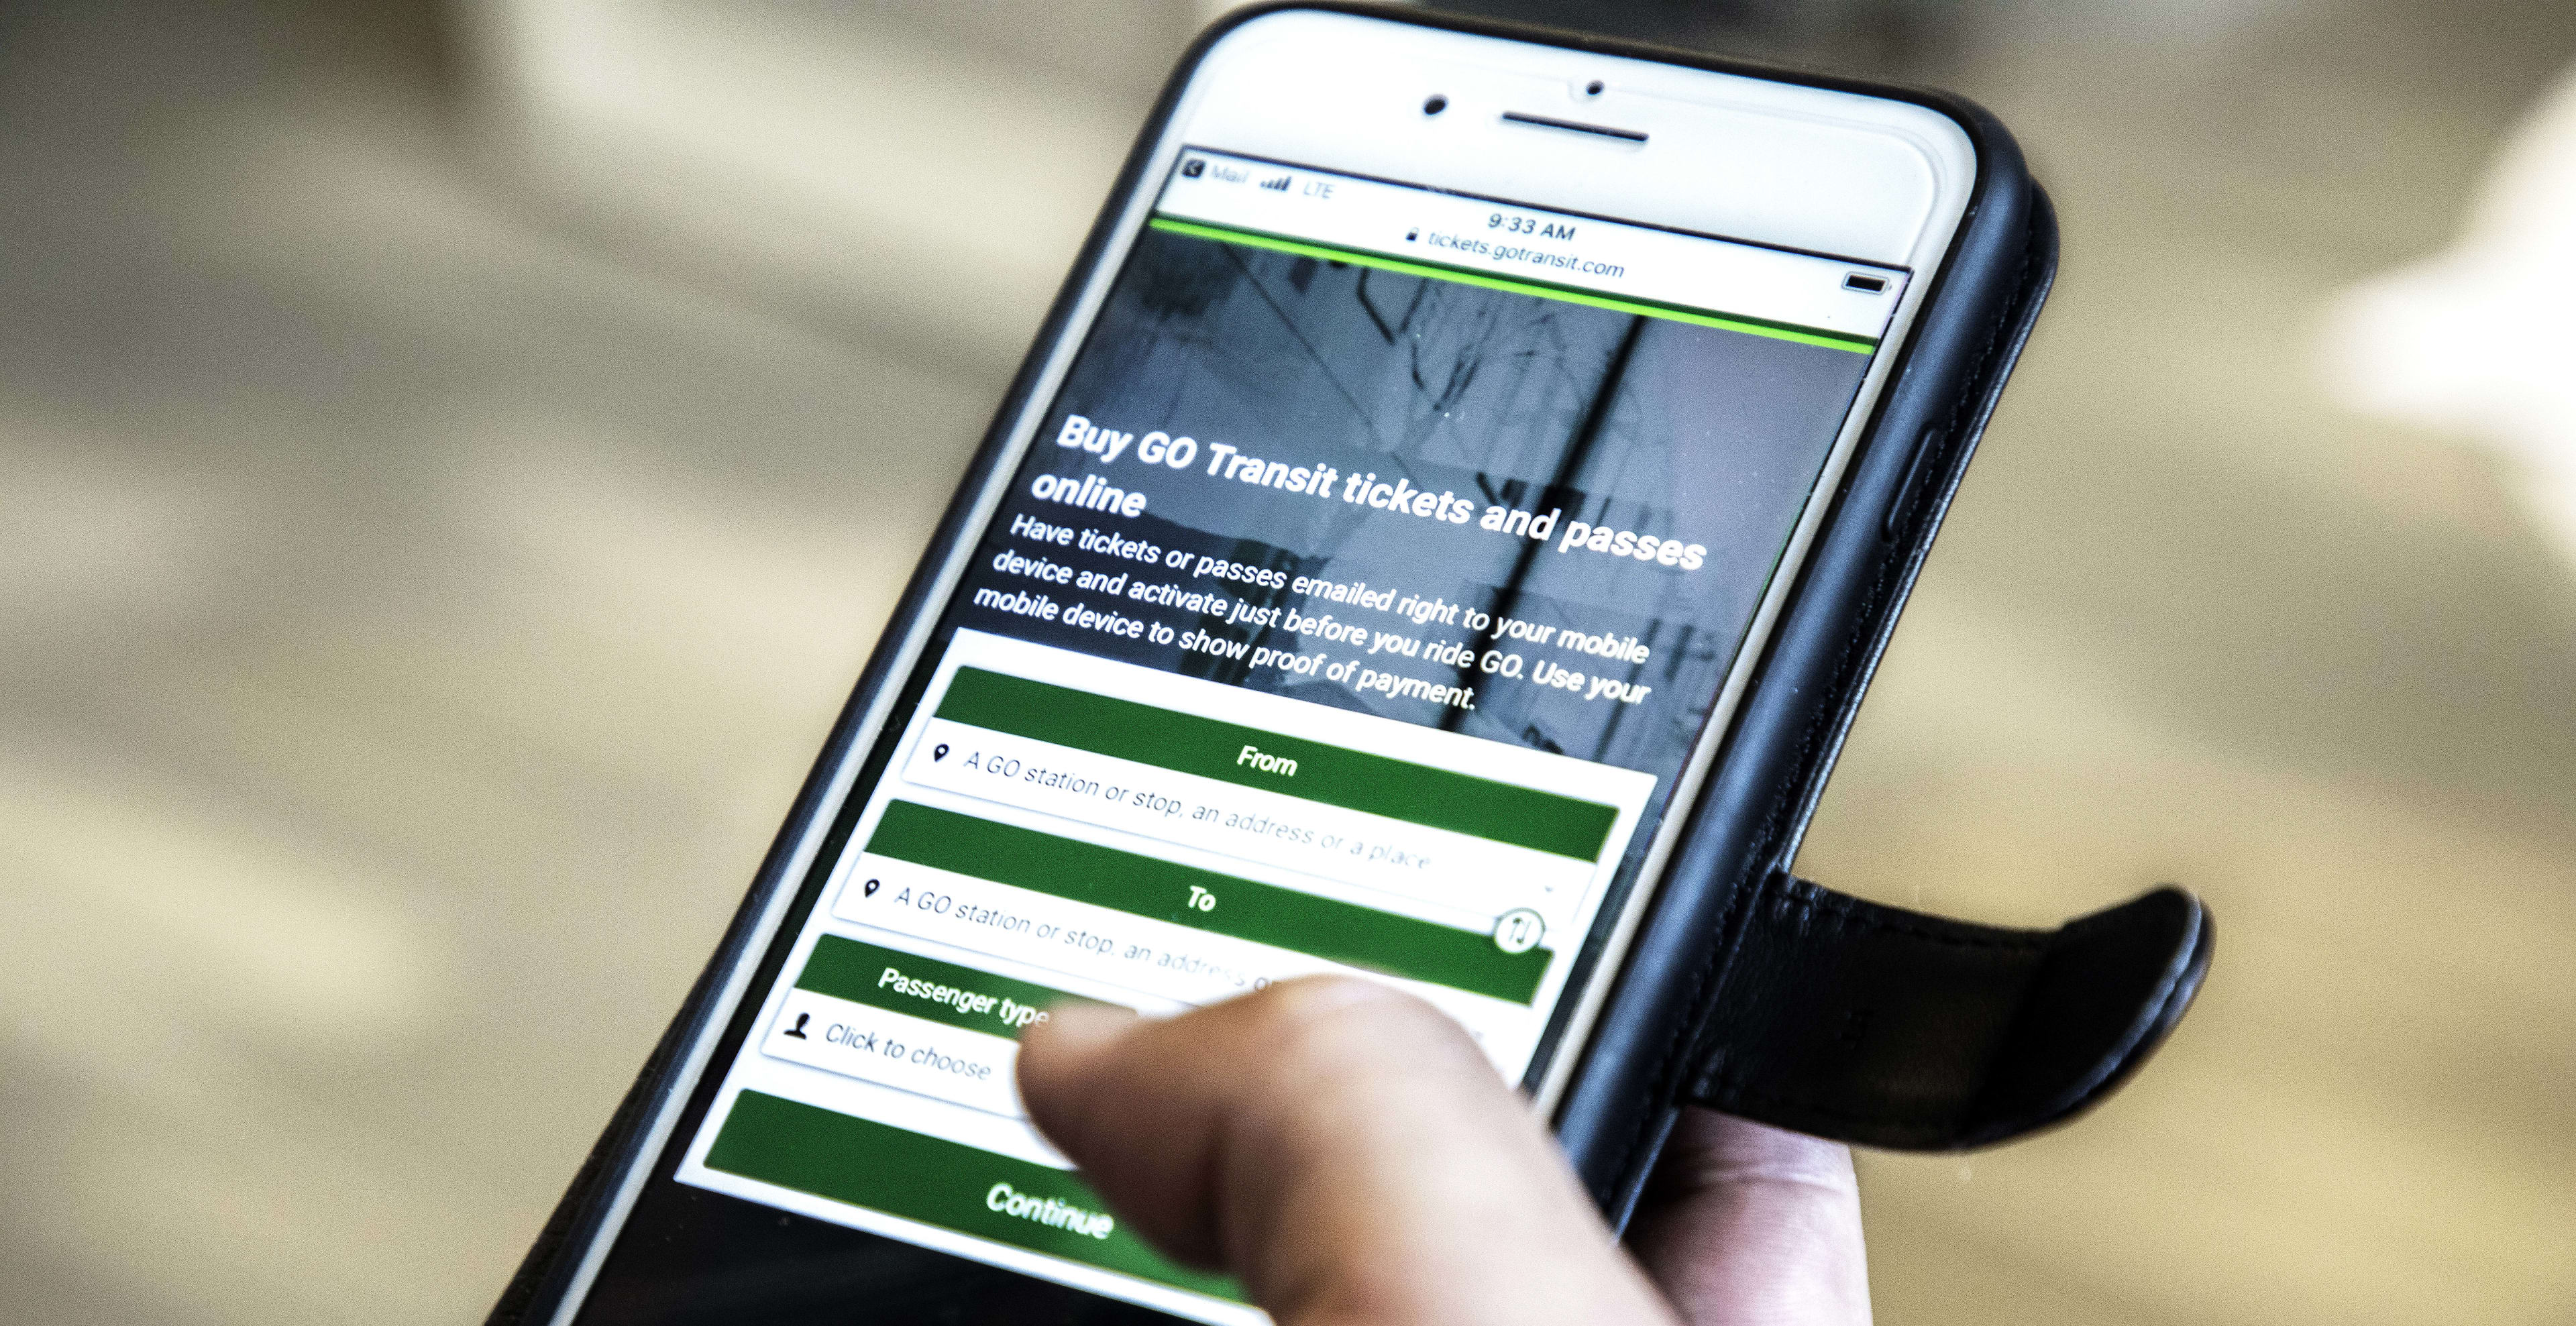 A mobile phone being used to order GO Transit e-tickets.